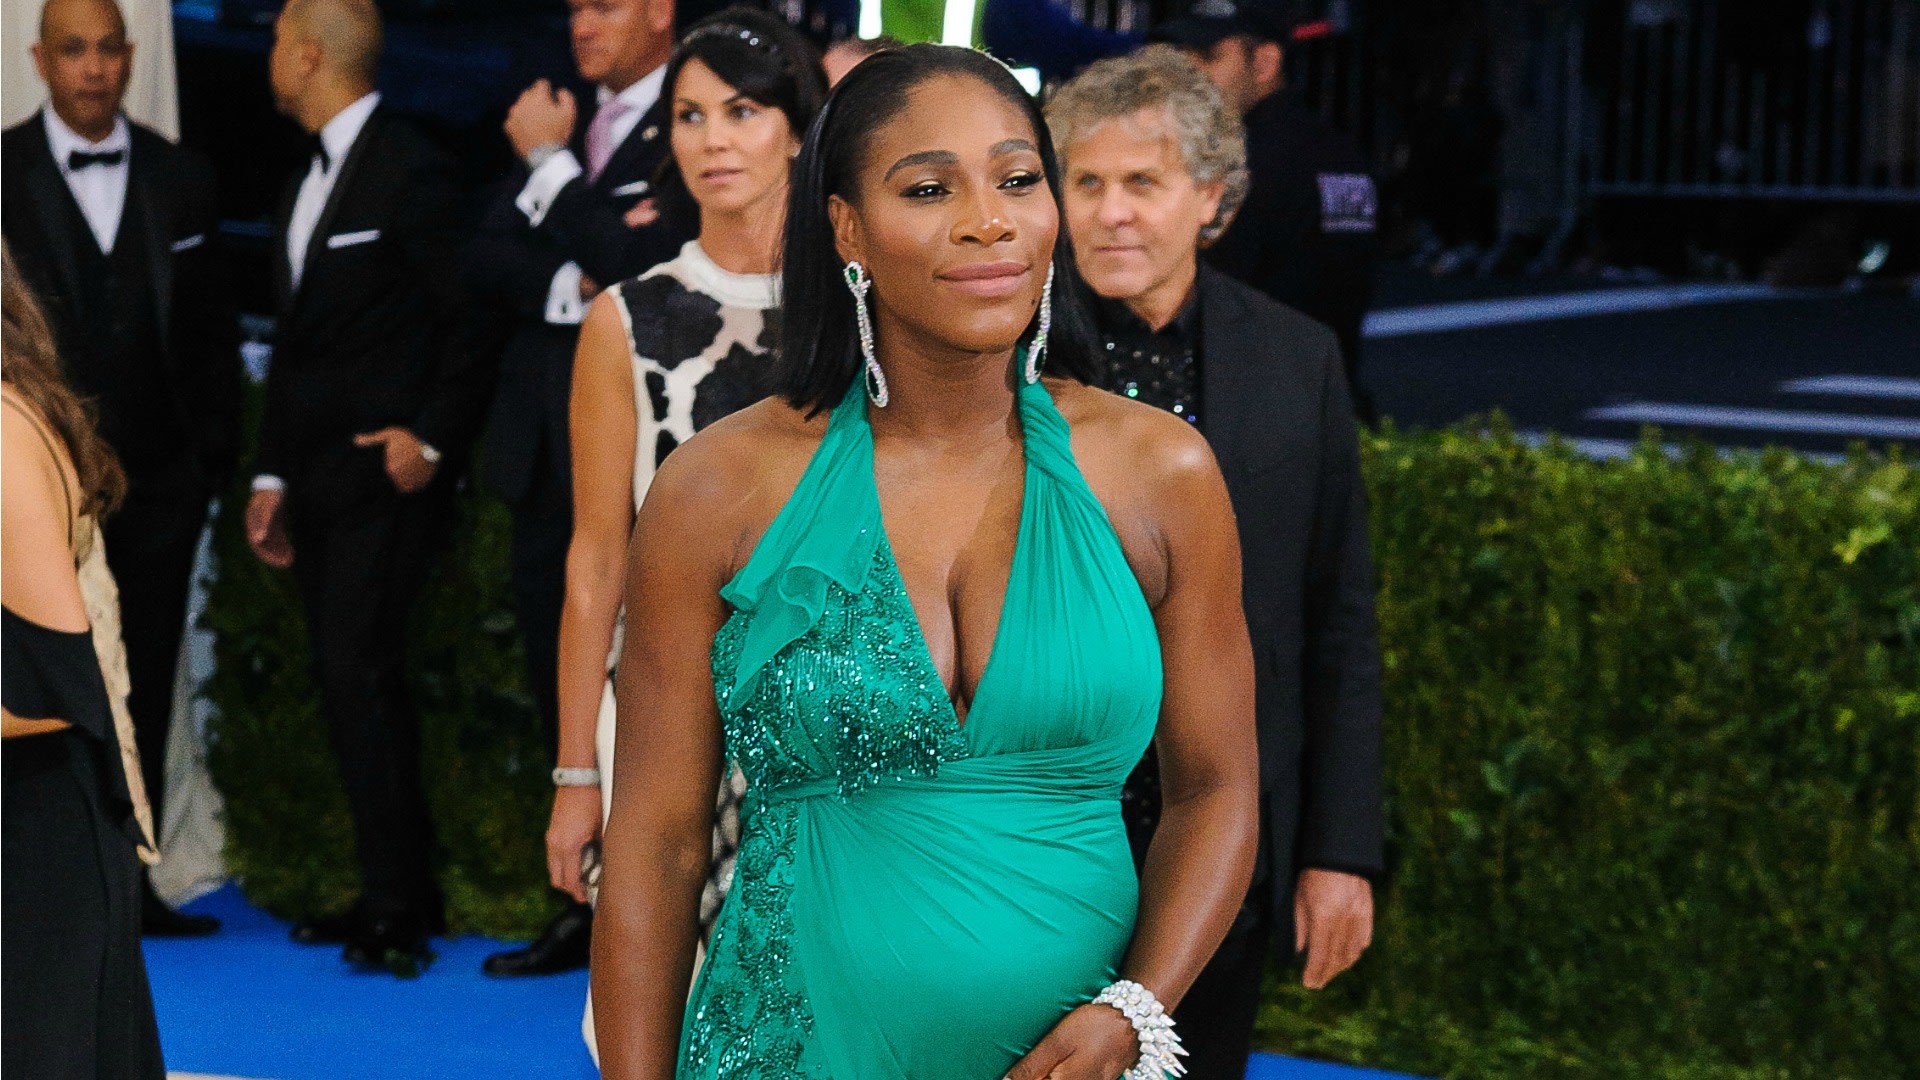 1920x1080 2 weeks after baby, & Serena Williams is already back in her short shorts